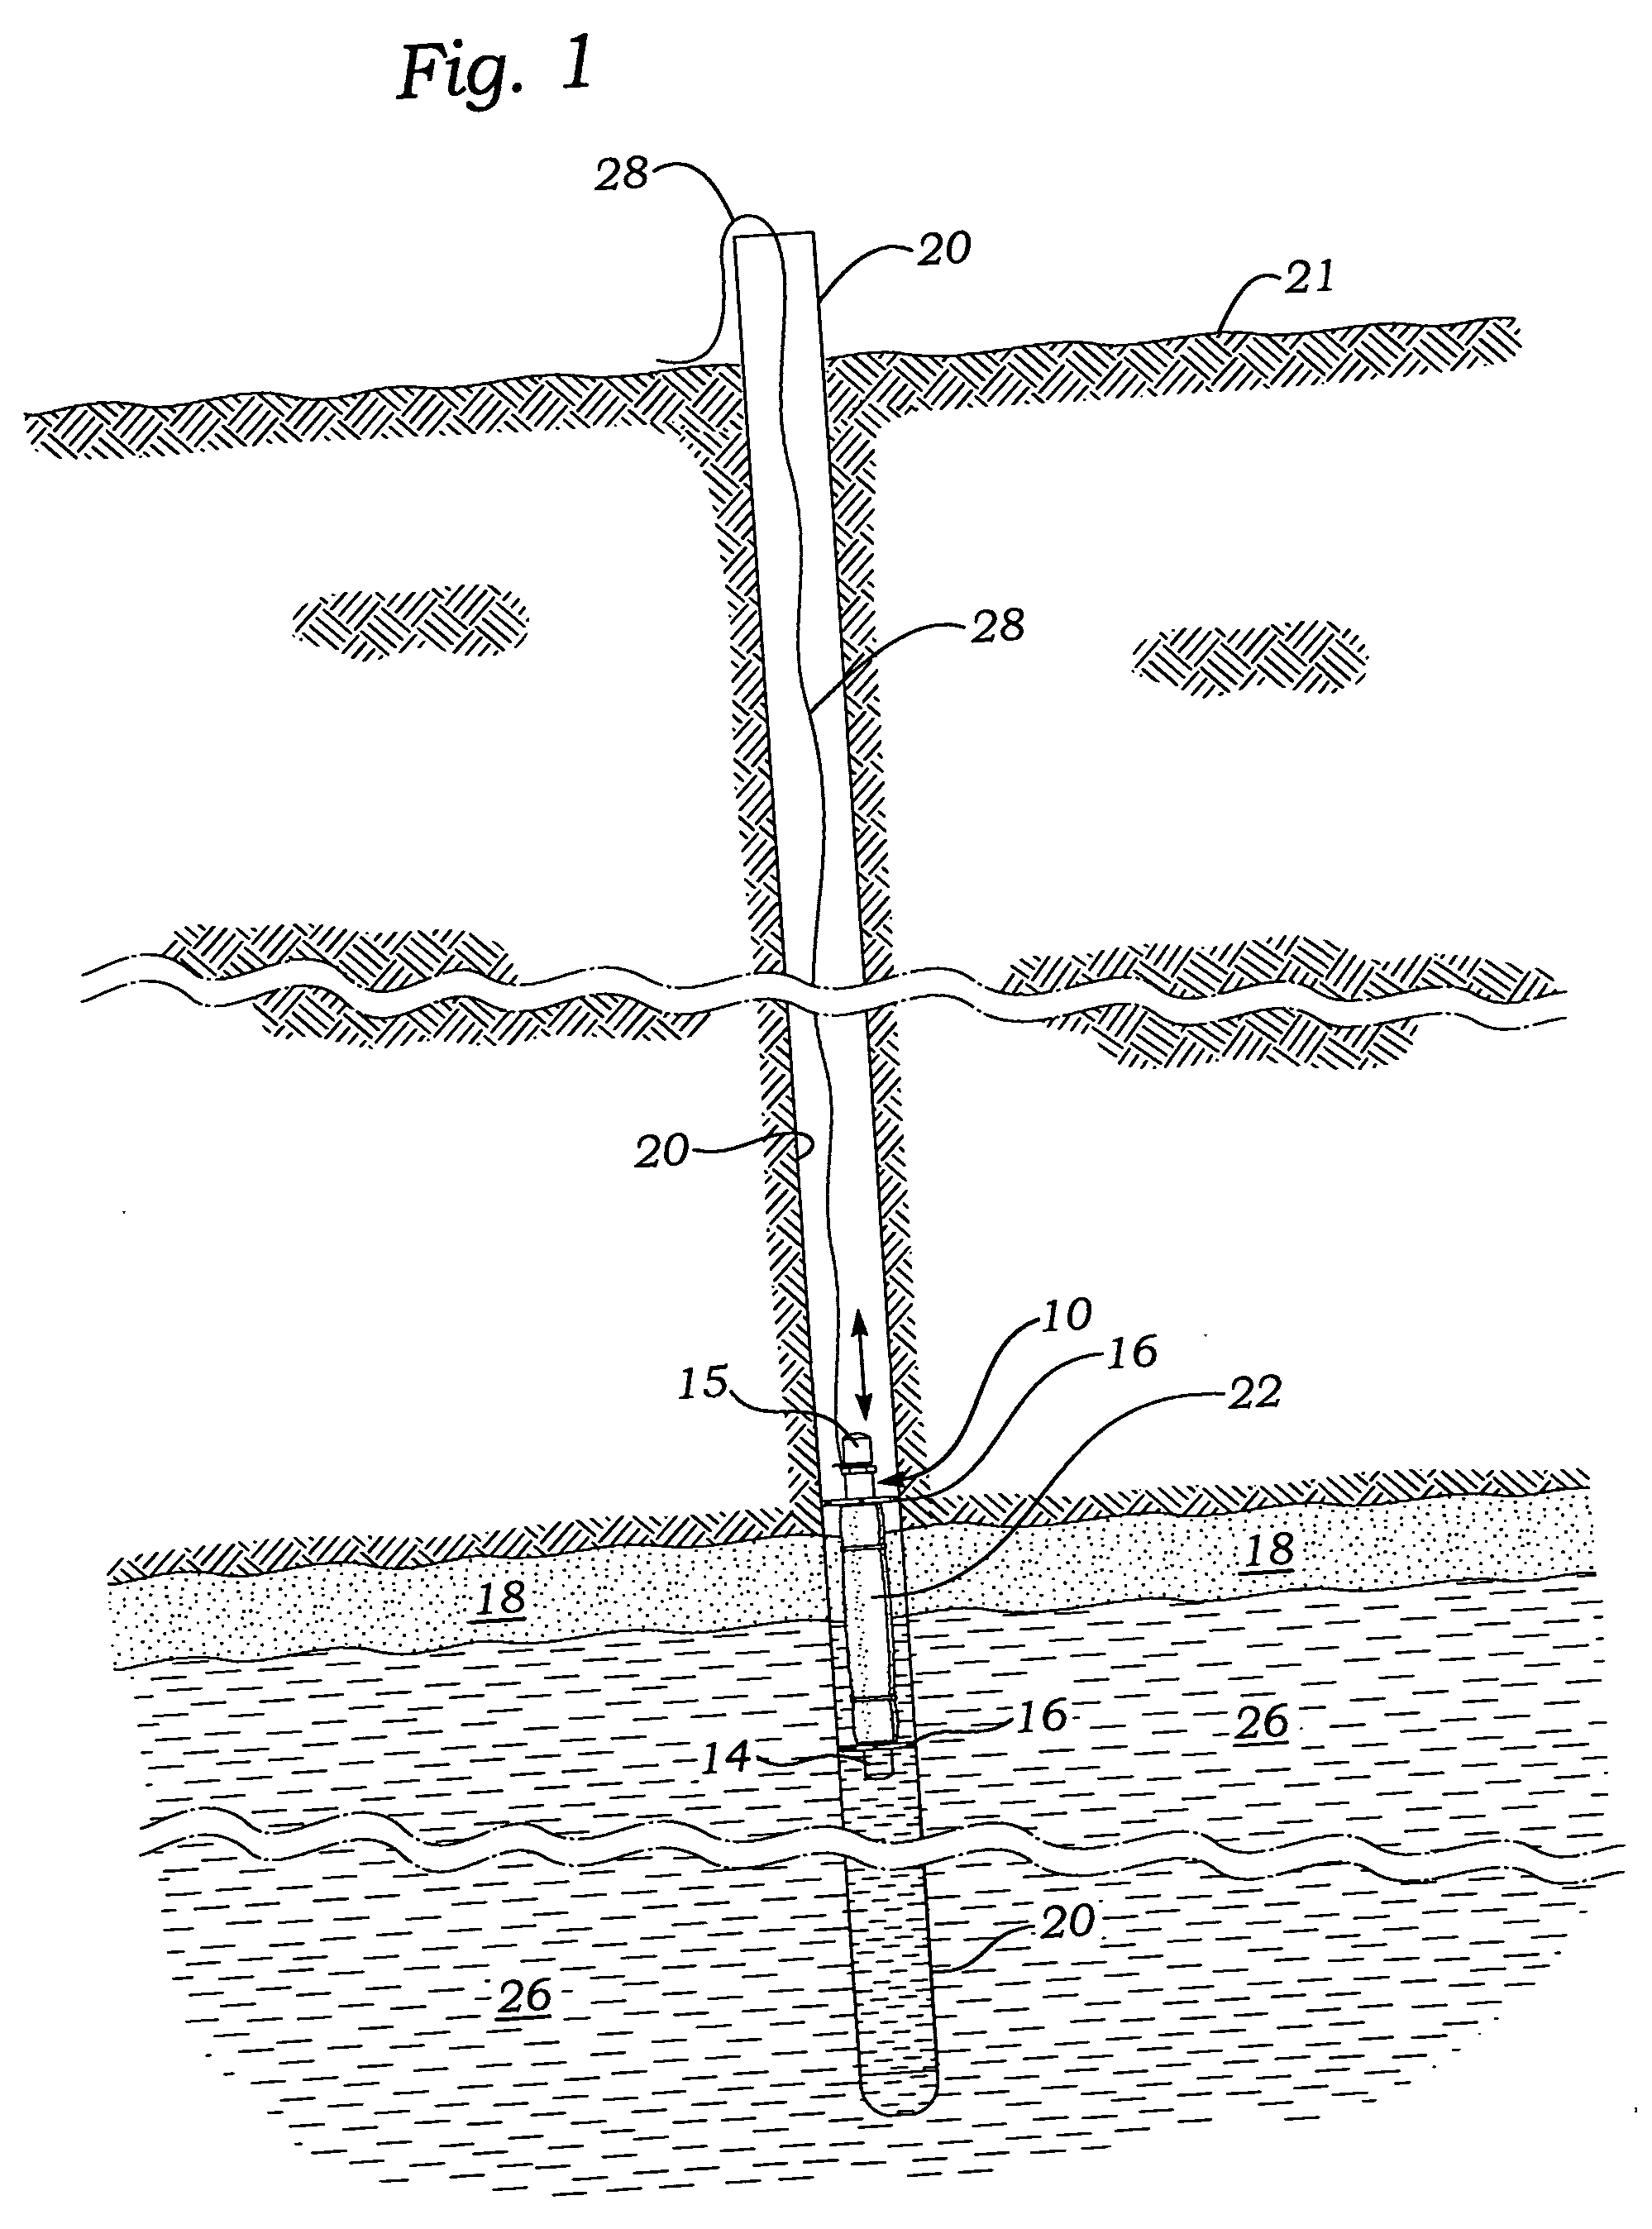 Self-leveling in-situ device and method for passively removing oil from water wells